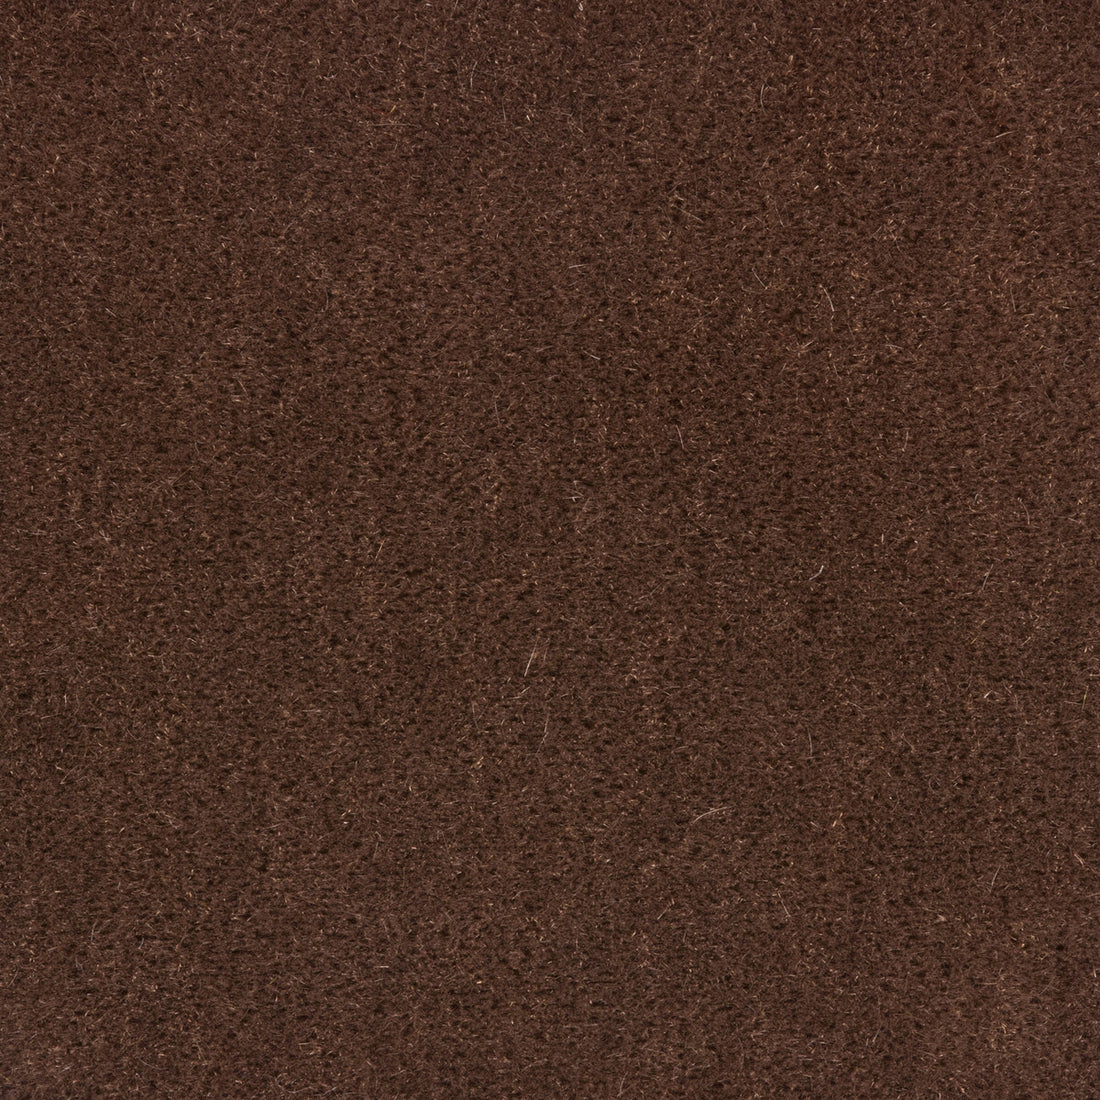 Windsor Mohair fabric in saddle color - pattern 34258.6.0 - by Kravet Couture